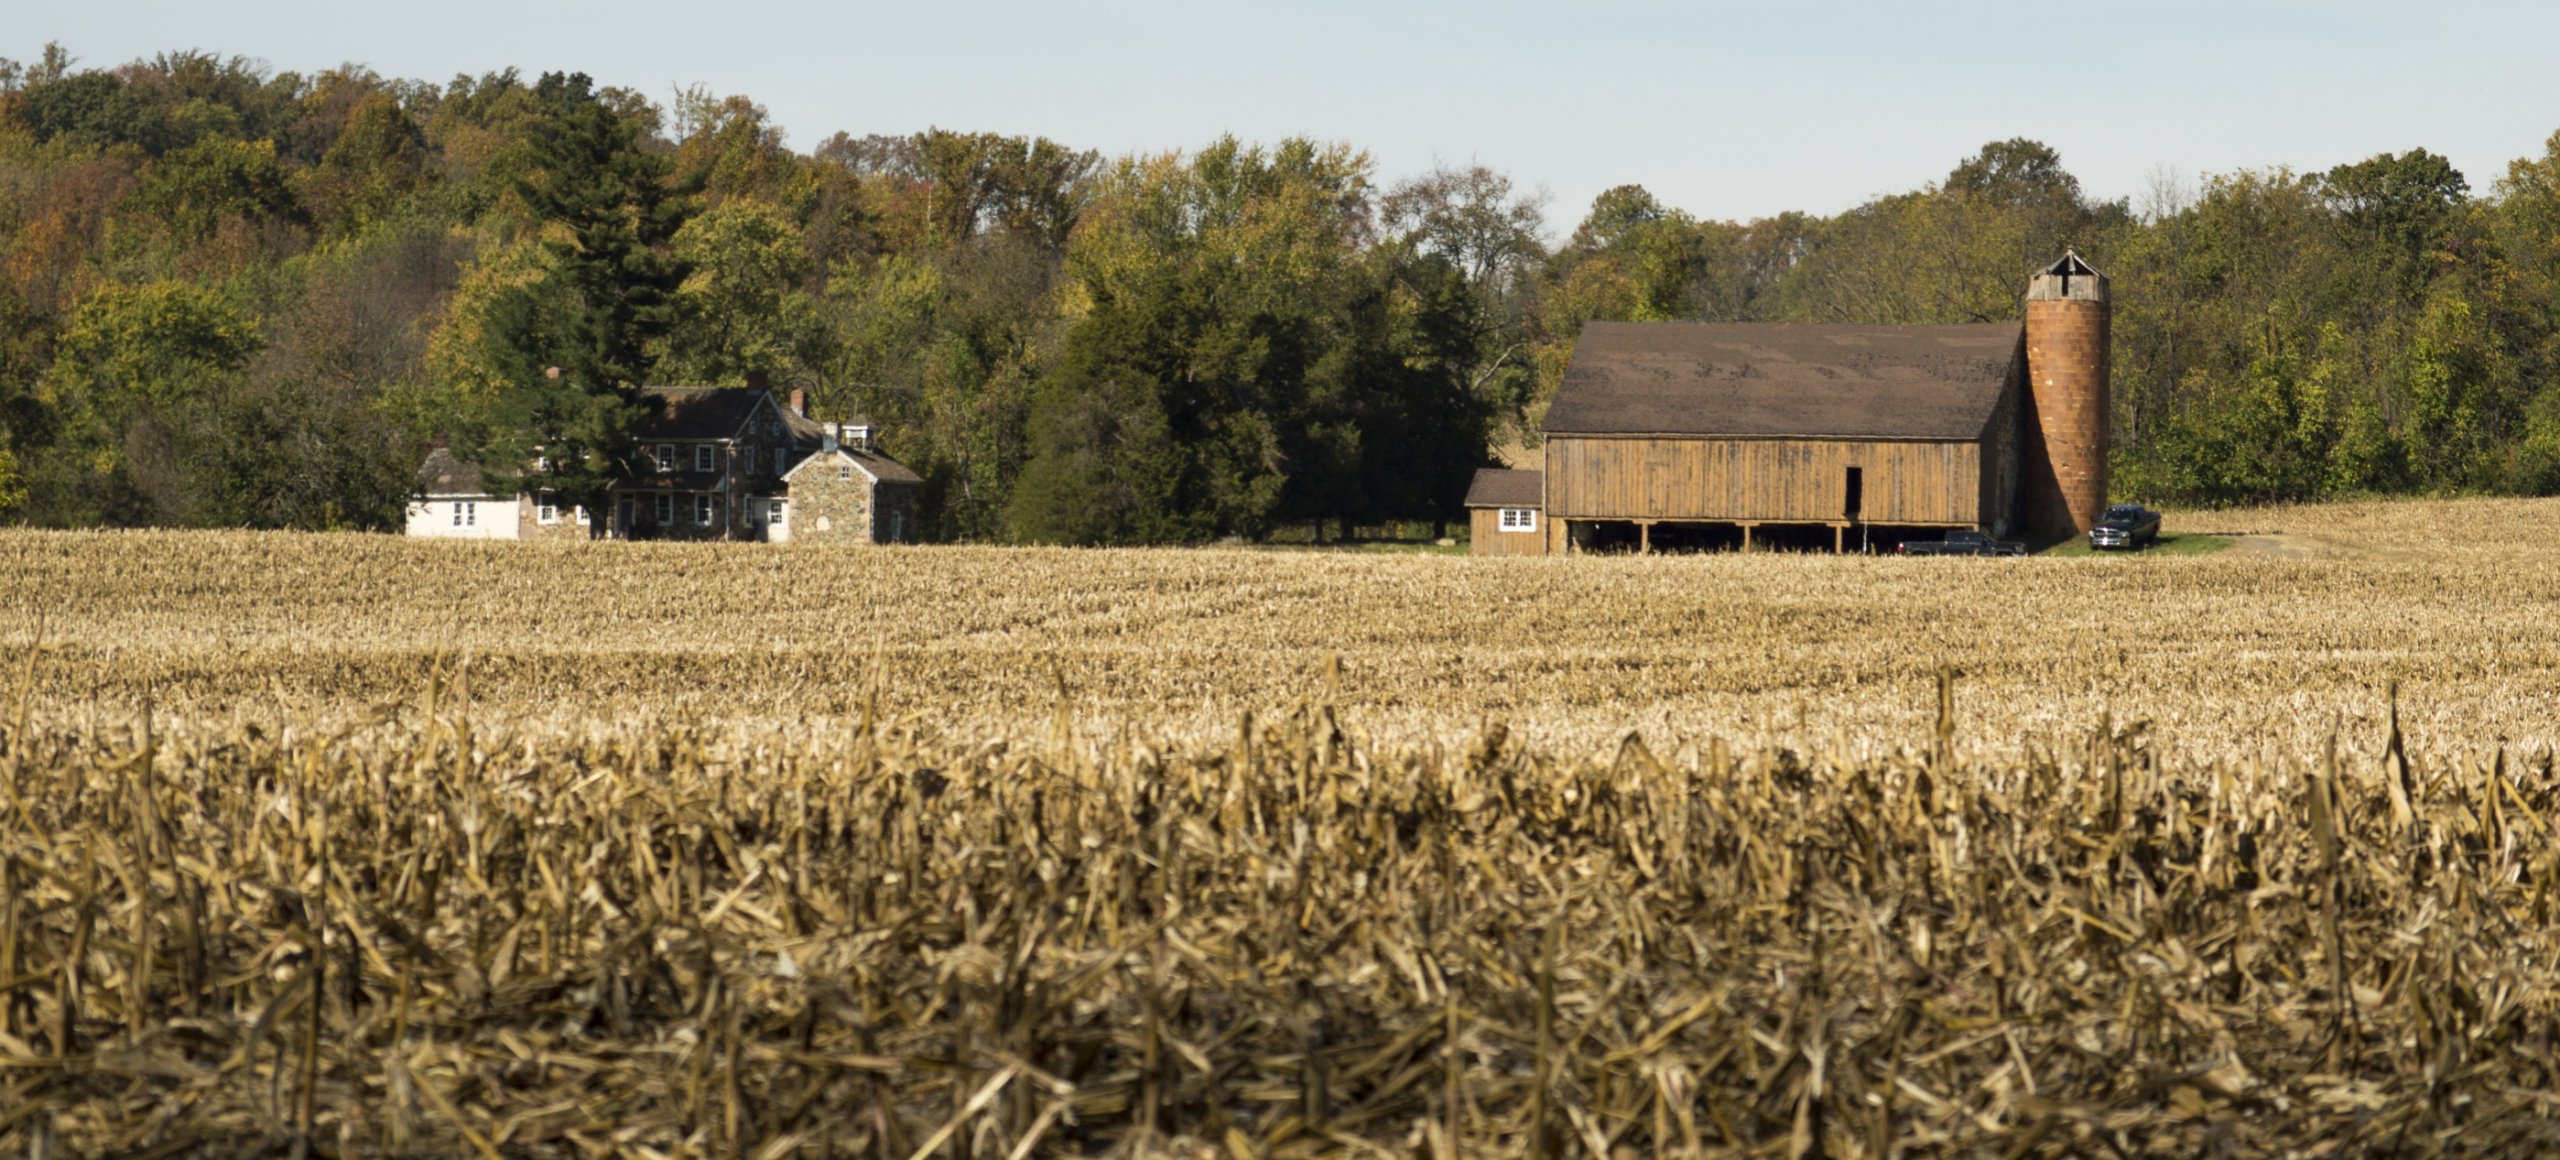 A stone house and a barn on a crop field with trees in the background.